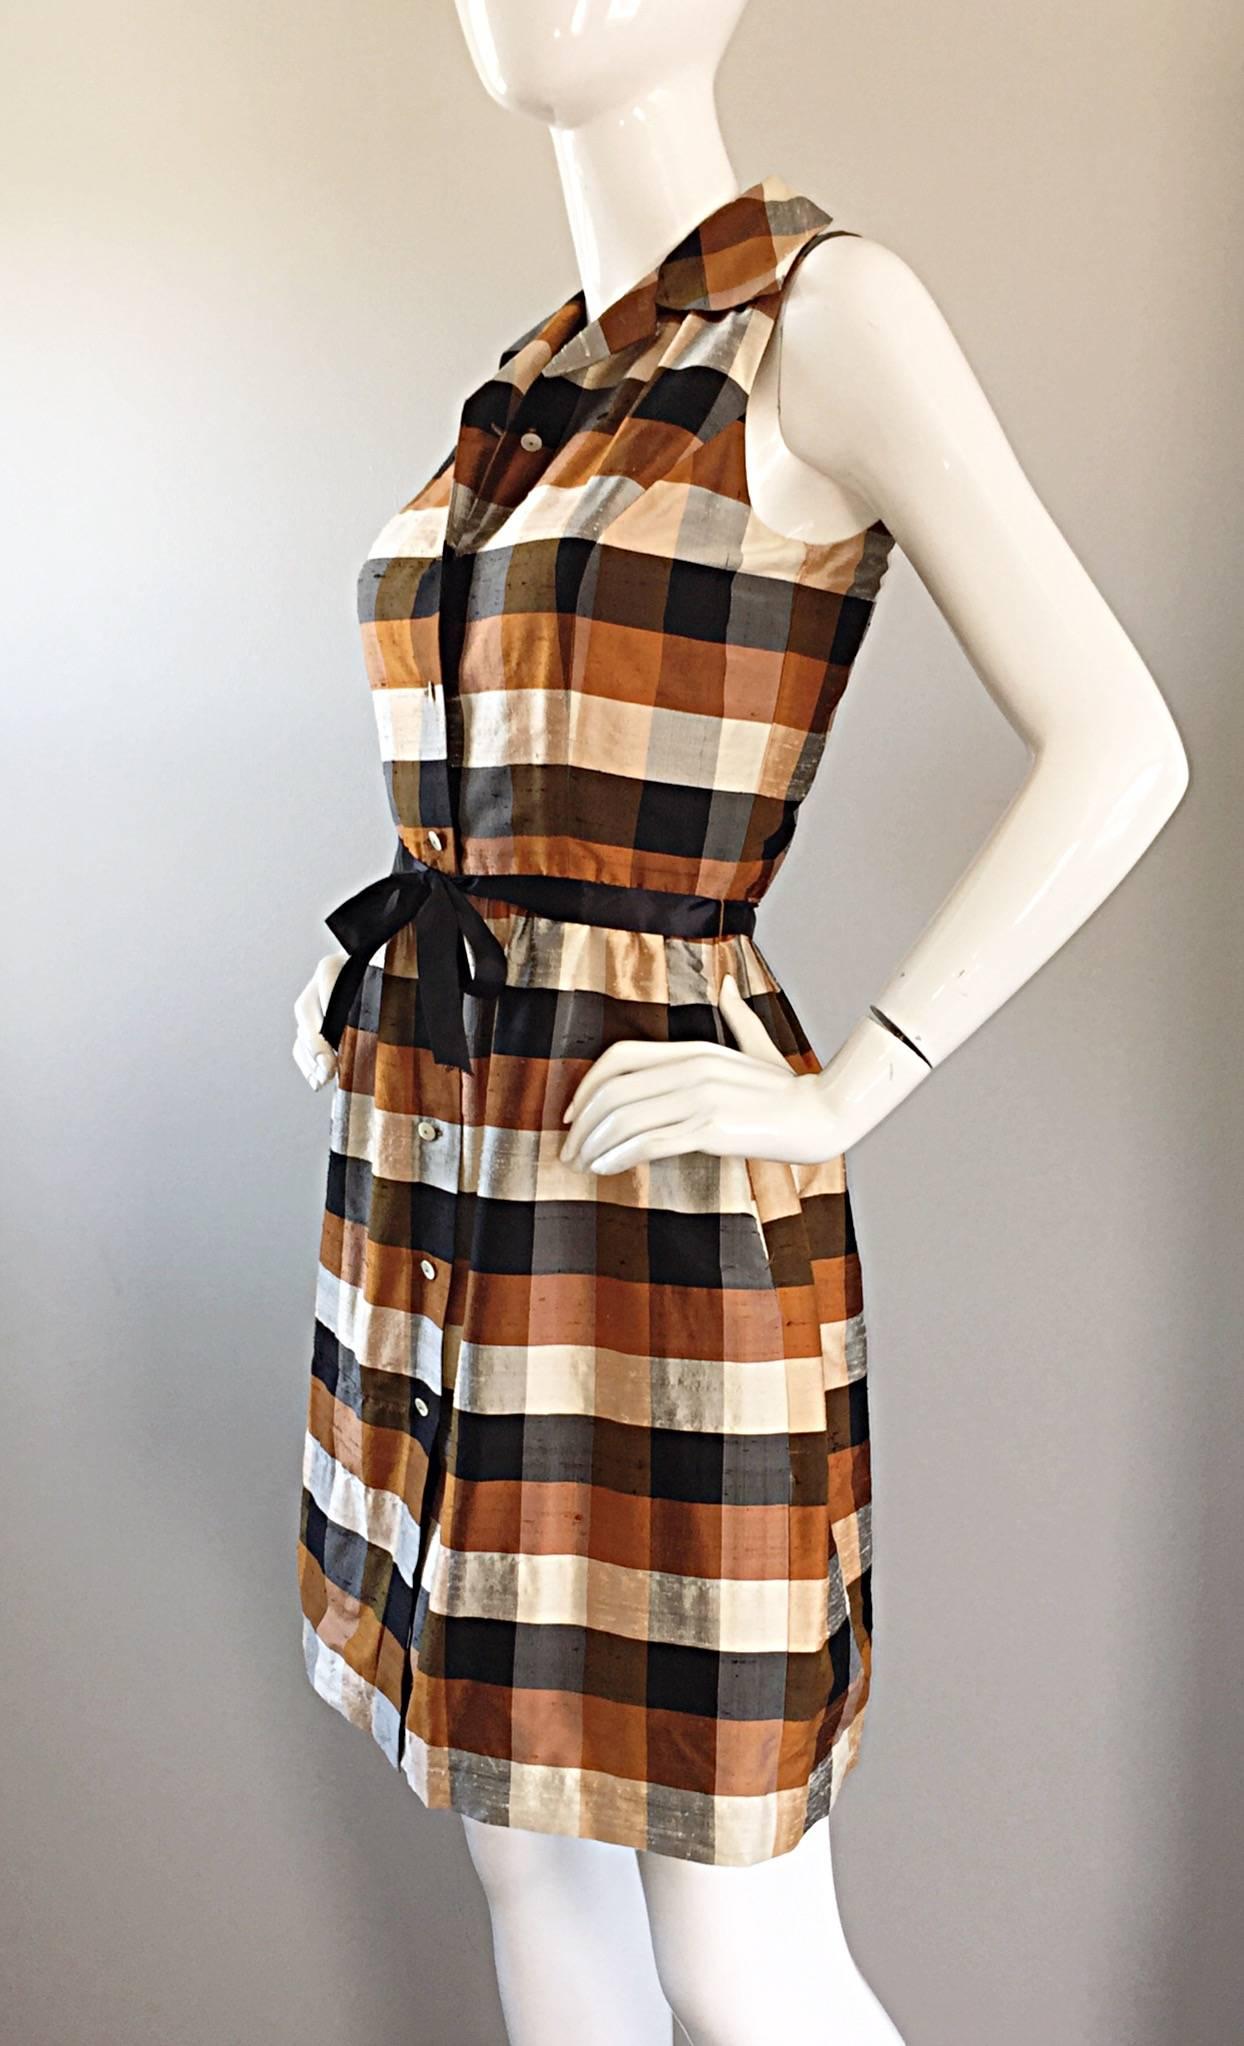 Isaac Mizrahi Vintage 1990s Does 1950s Brown & Black Plaid Silk Shirt Dress In Excellent Condition For Sale In San Diego, CA